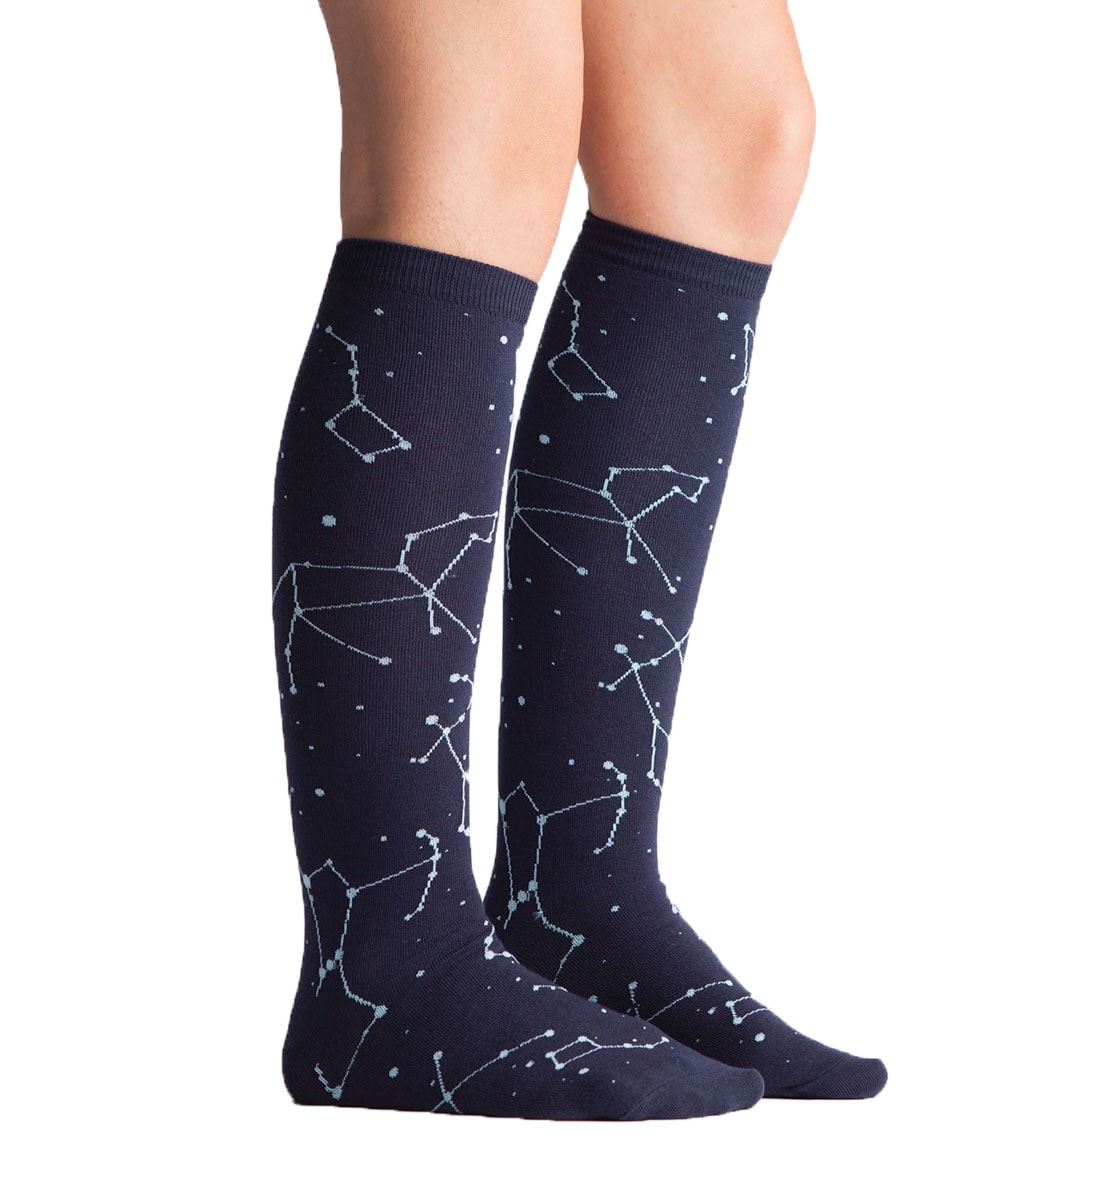 SOCK it to me Unisex Knee High Socks (f0180),Constellation - Constellation,One Size